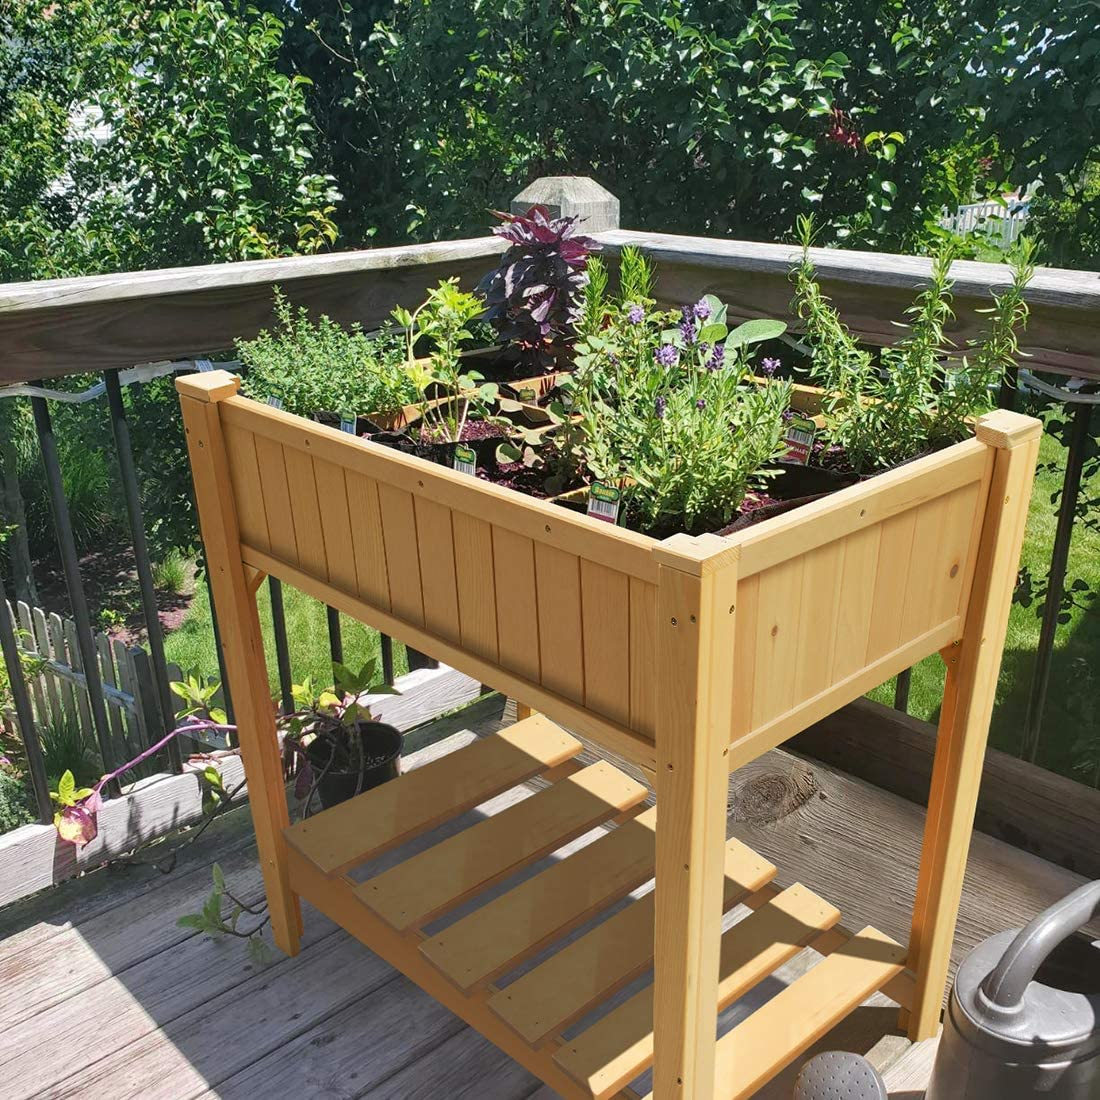 Everything About the Raised Garden Beds from Quictent